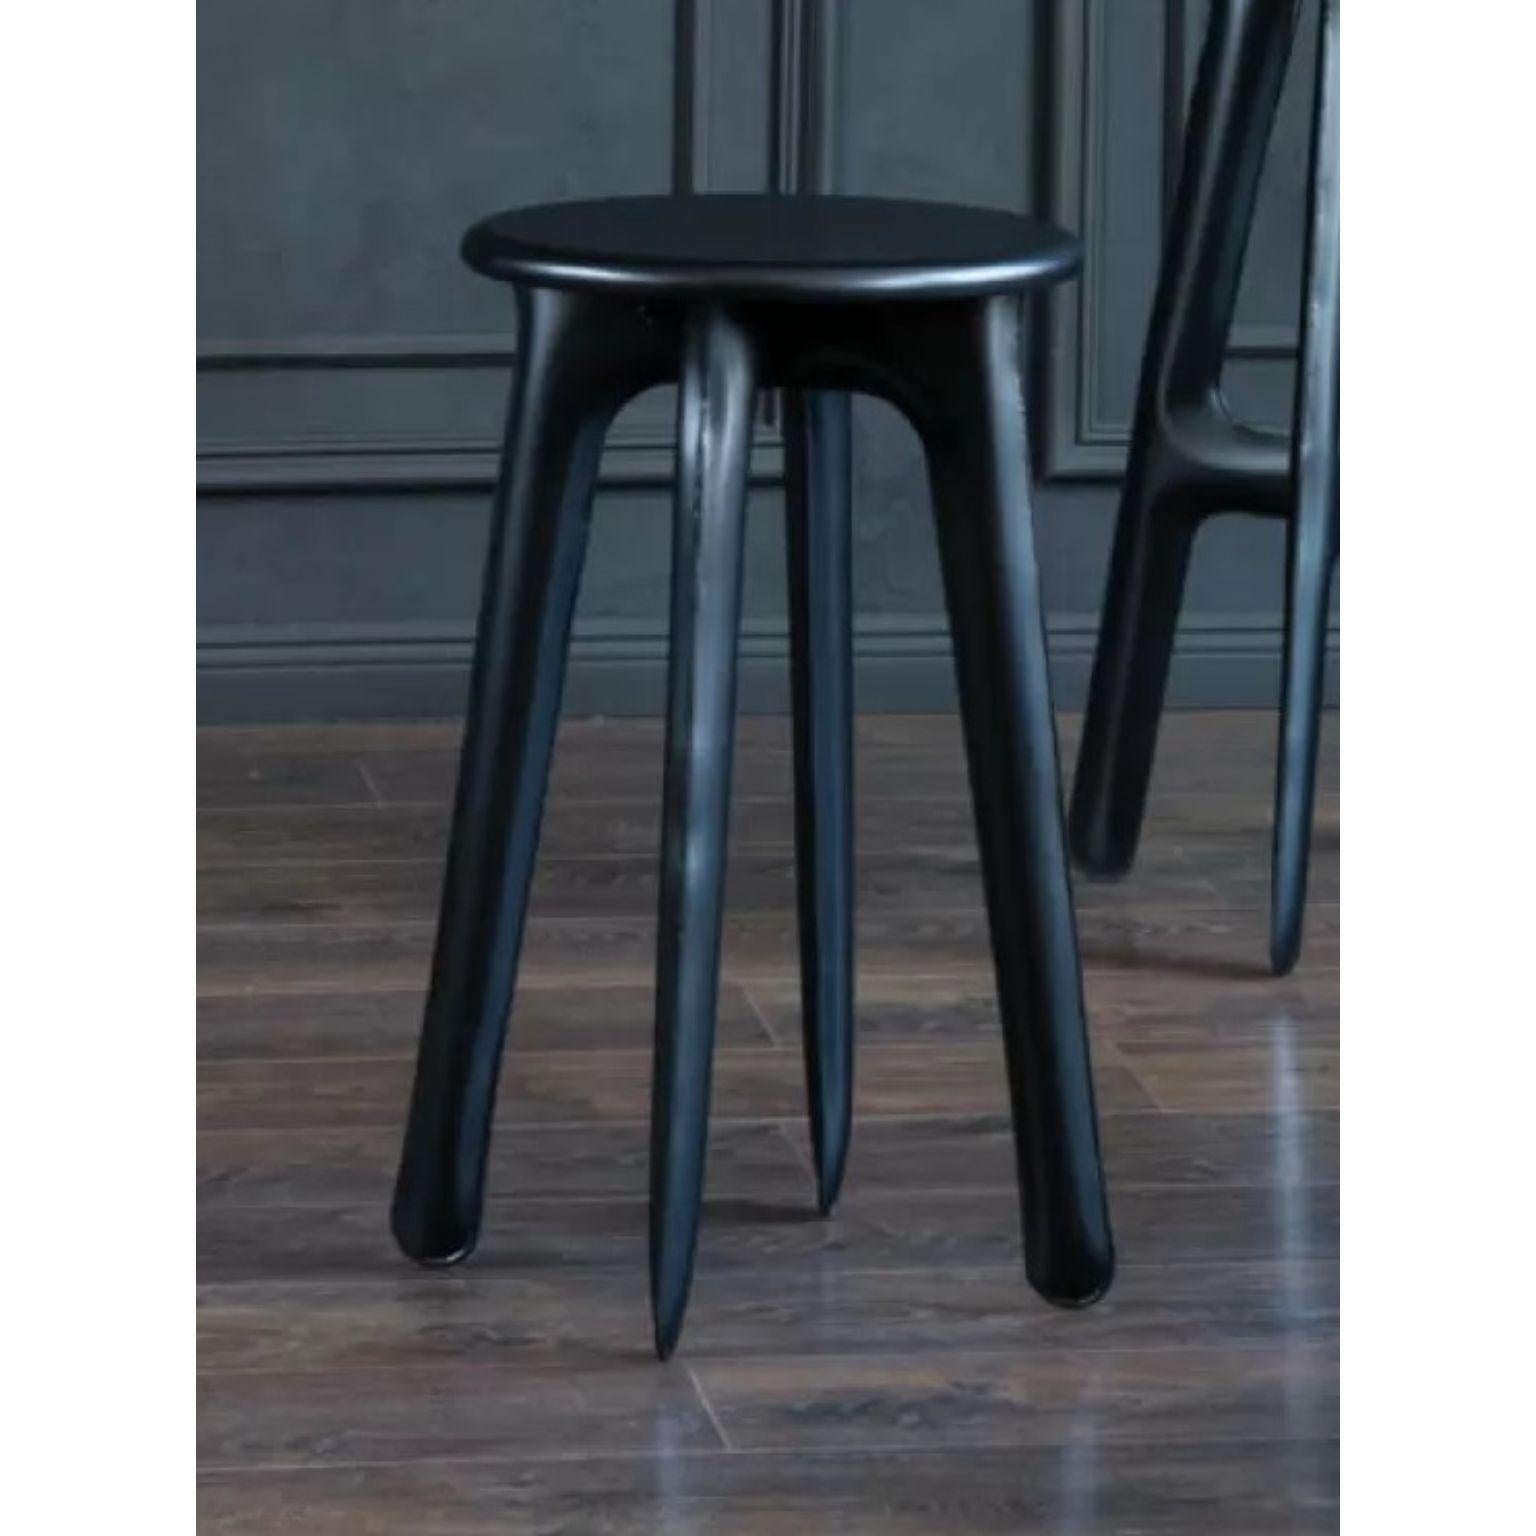 Ultraleggera Anodic Black Kitchen Stool by Zieta
Dimensions: Ø 34 x H 60 cm.
Materials: Aluminum.
Finish: Anodic black.

Inspired by the features of the Ultraleggera chair, we expanded its concept with new objects. Please welcome the family driven